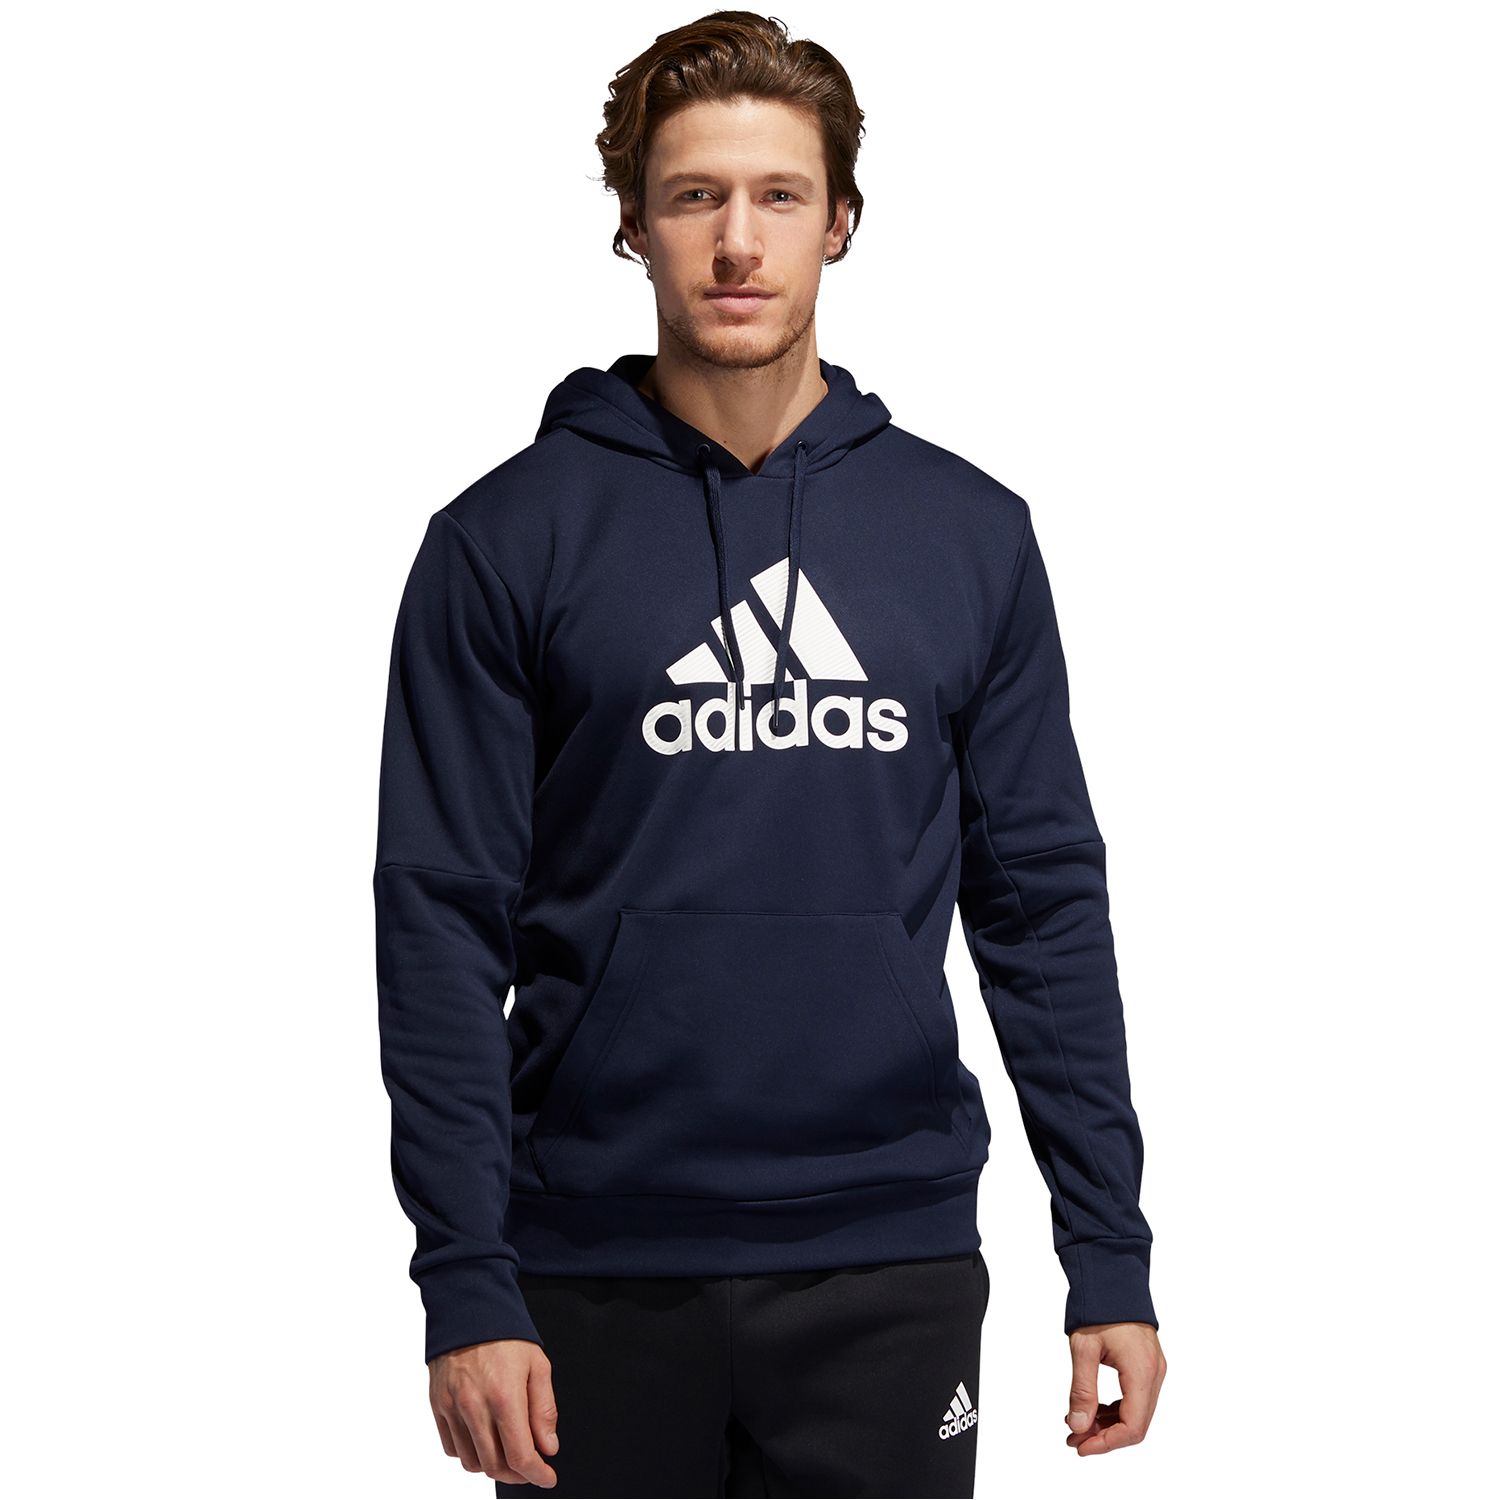 adidas Game and Go Pullover Fleece Hoodie